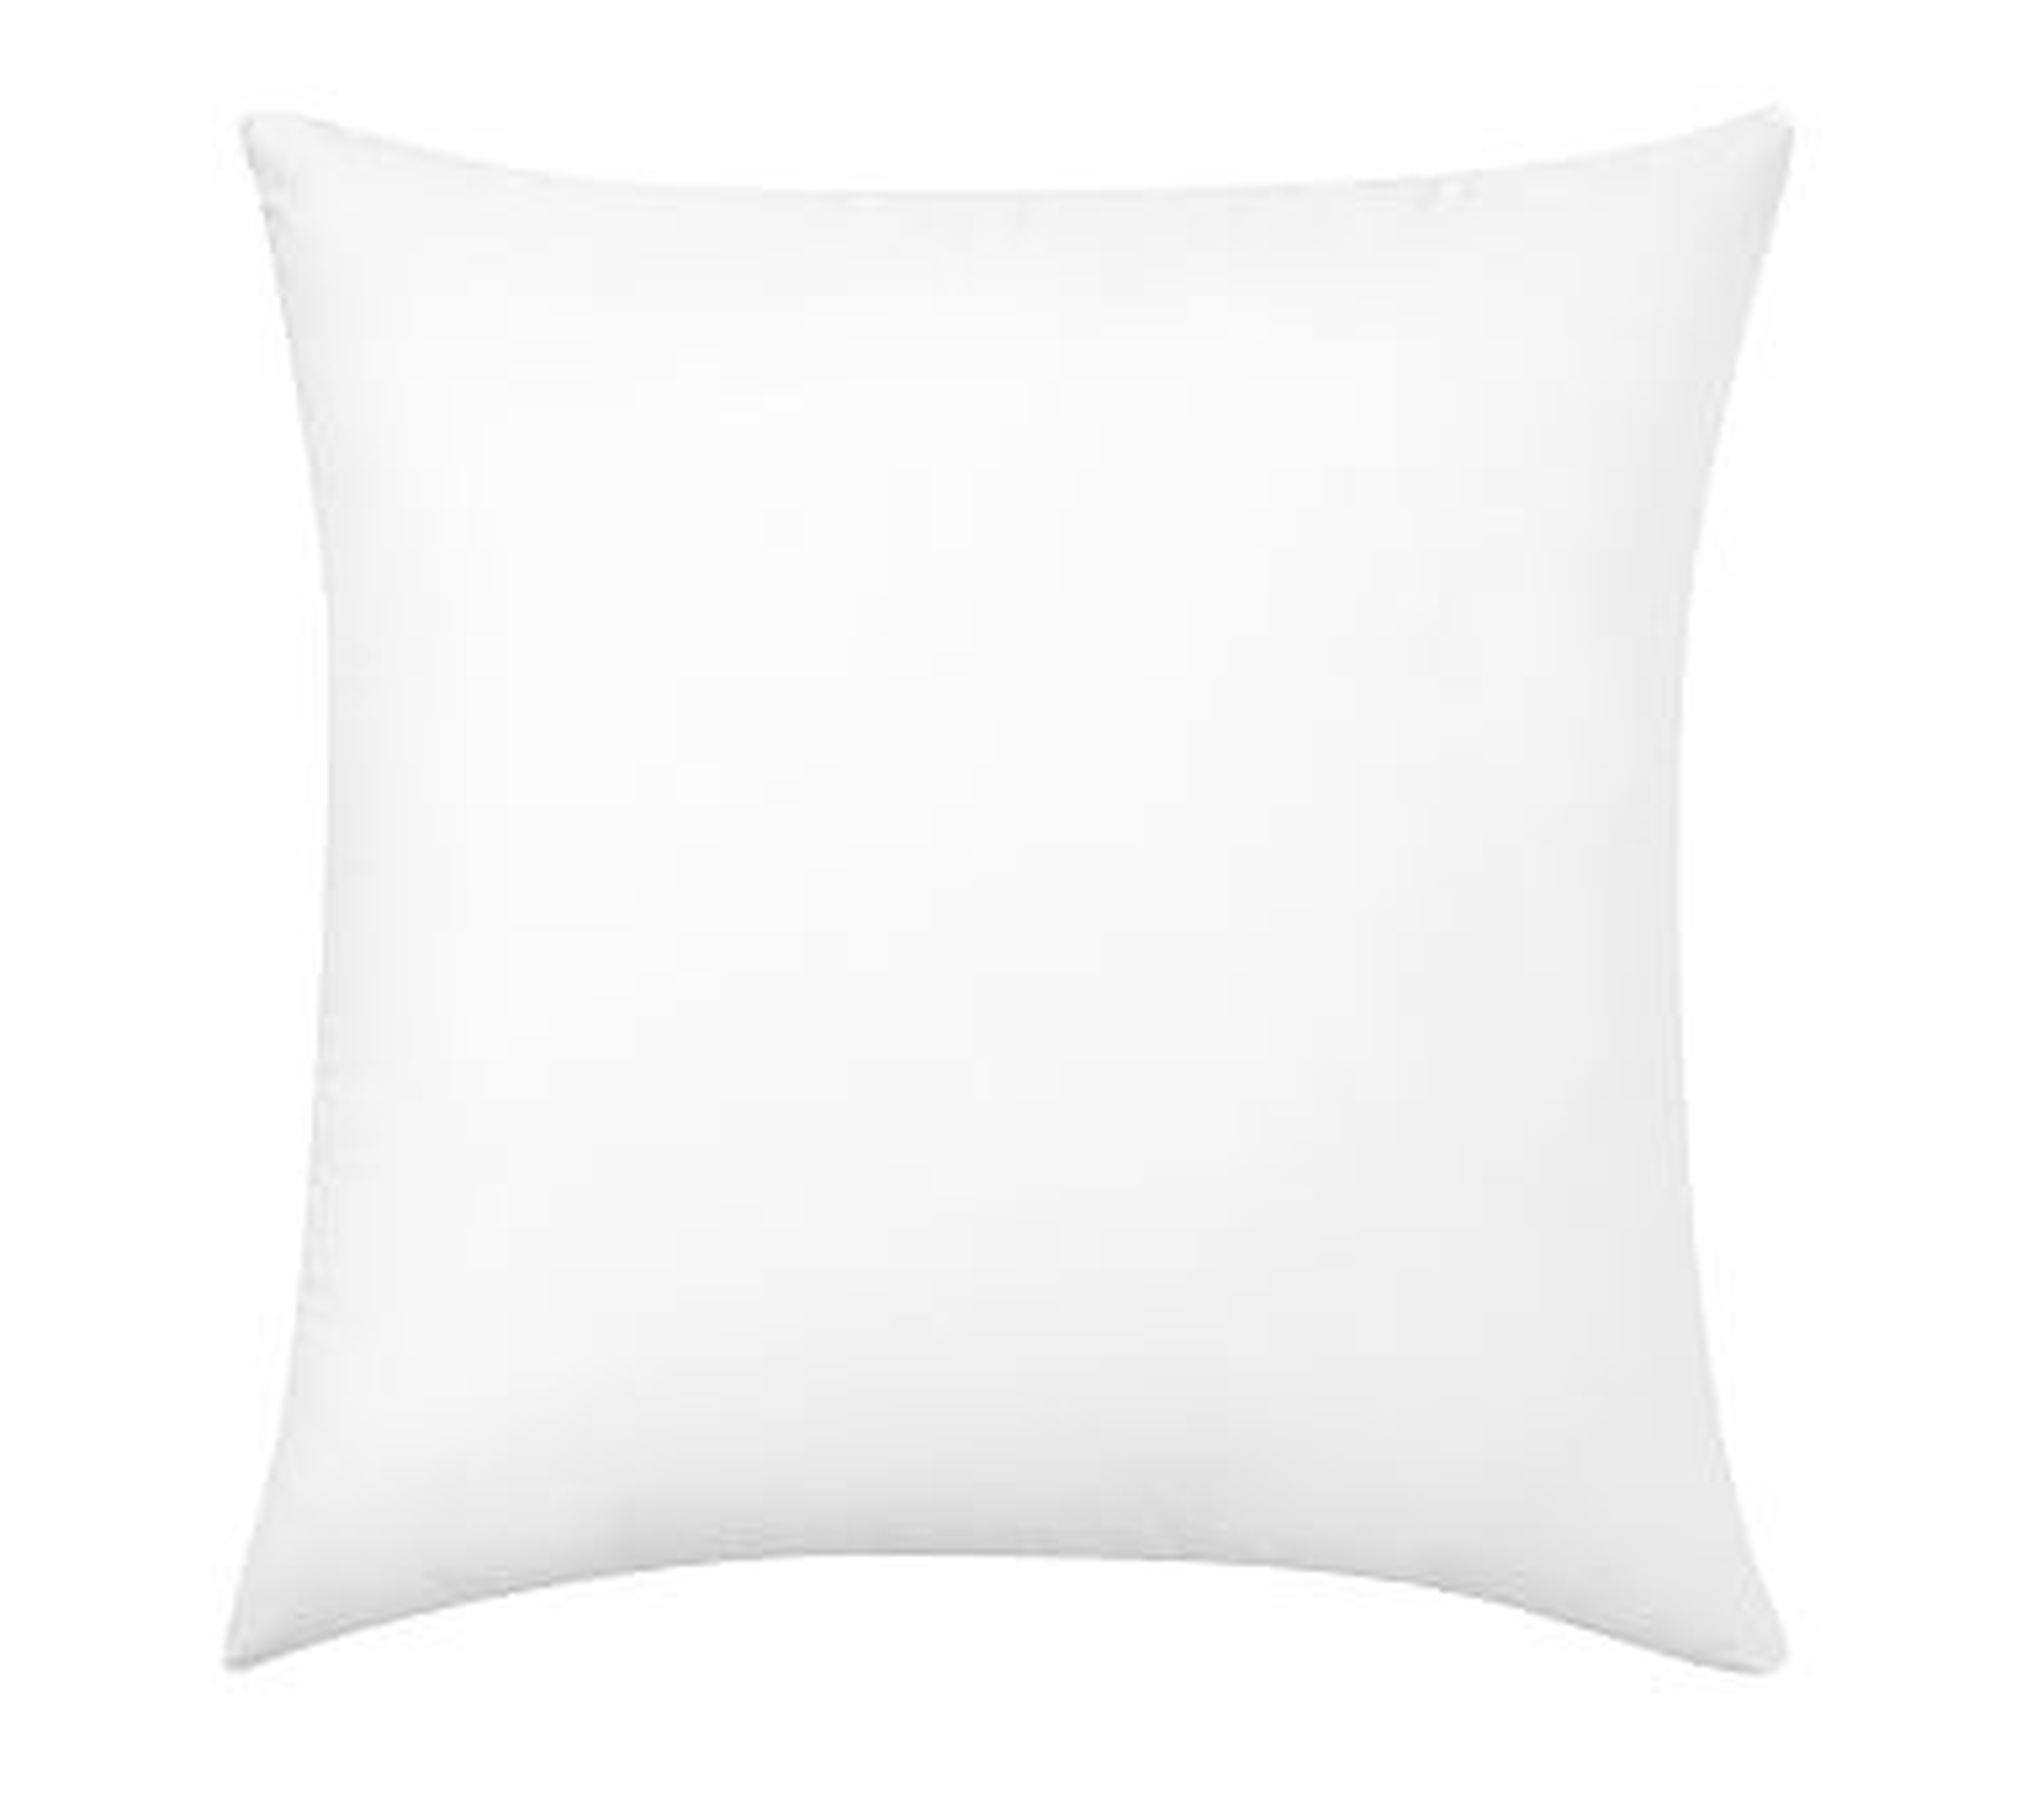 Synthetic Fill Euro Pillow Insert, 26" Sq. - Pottery Barn